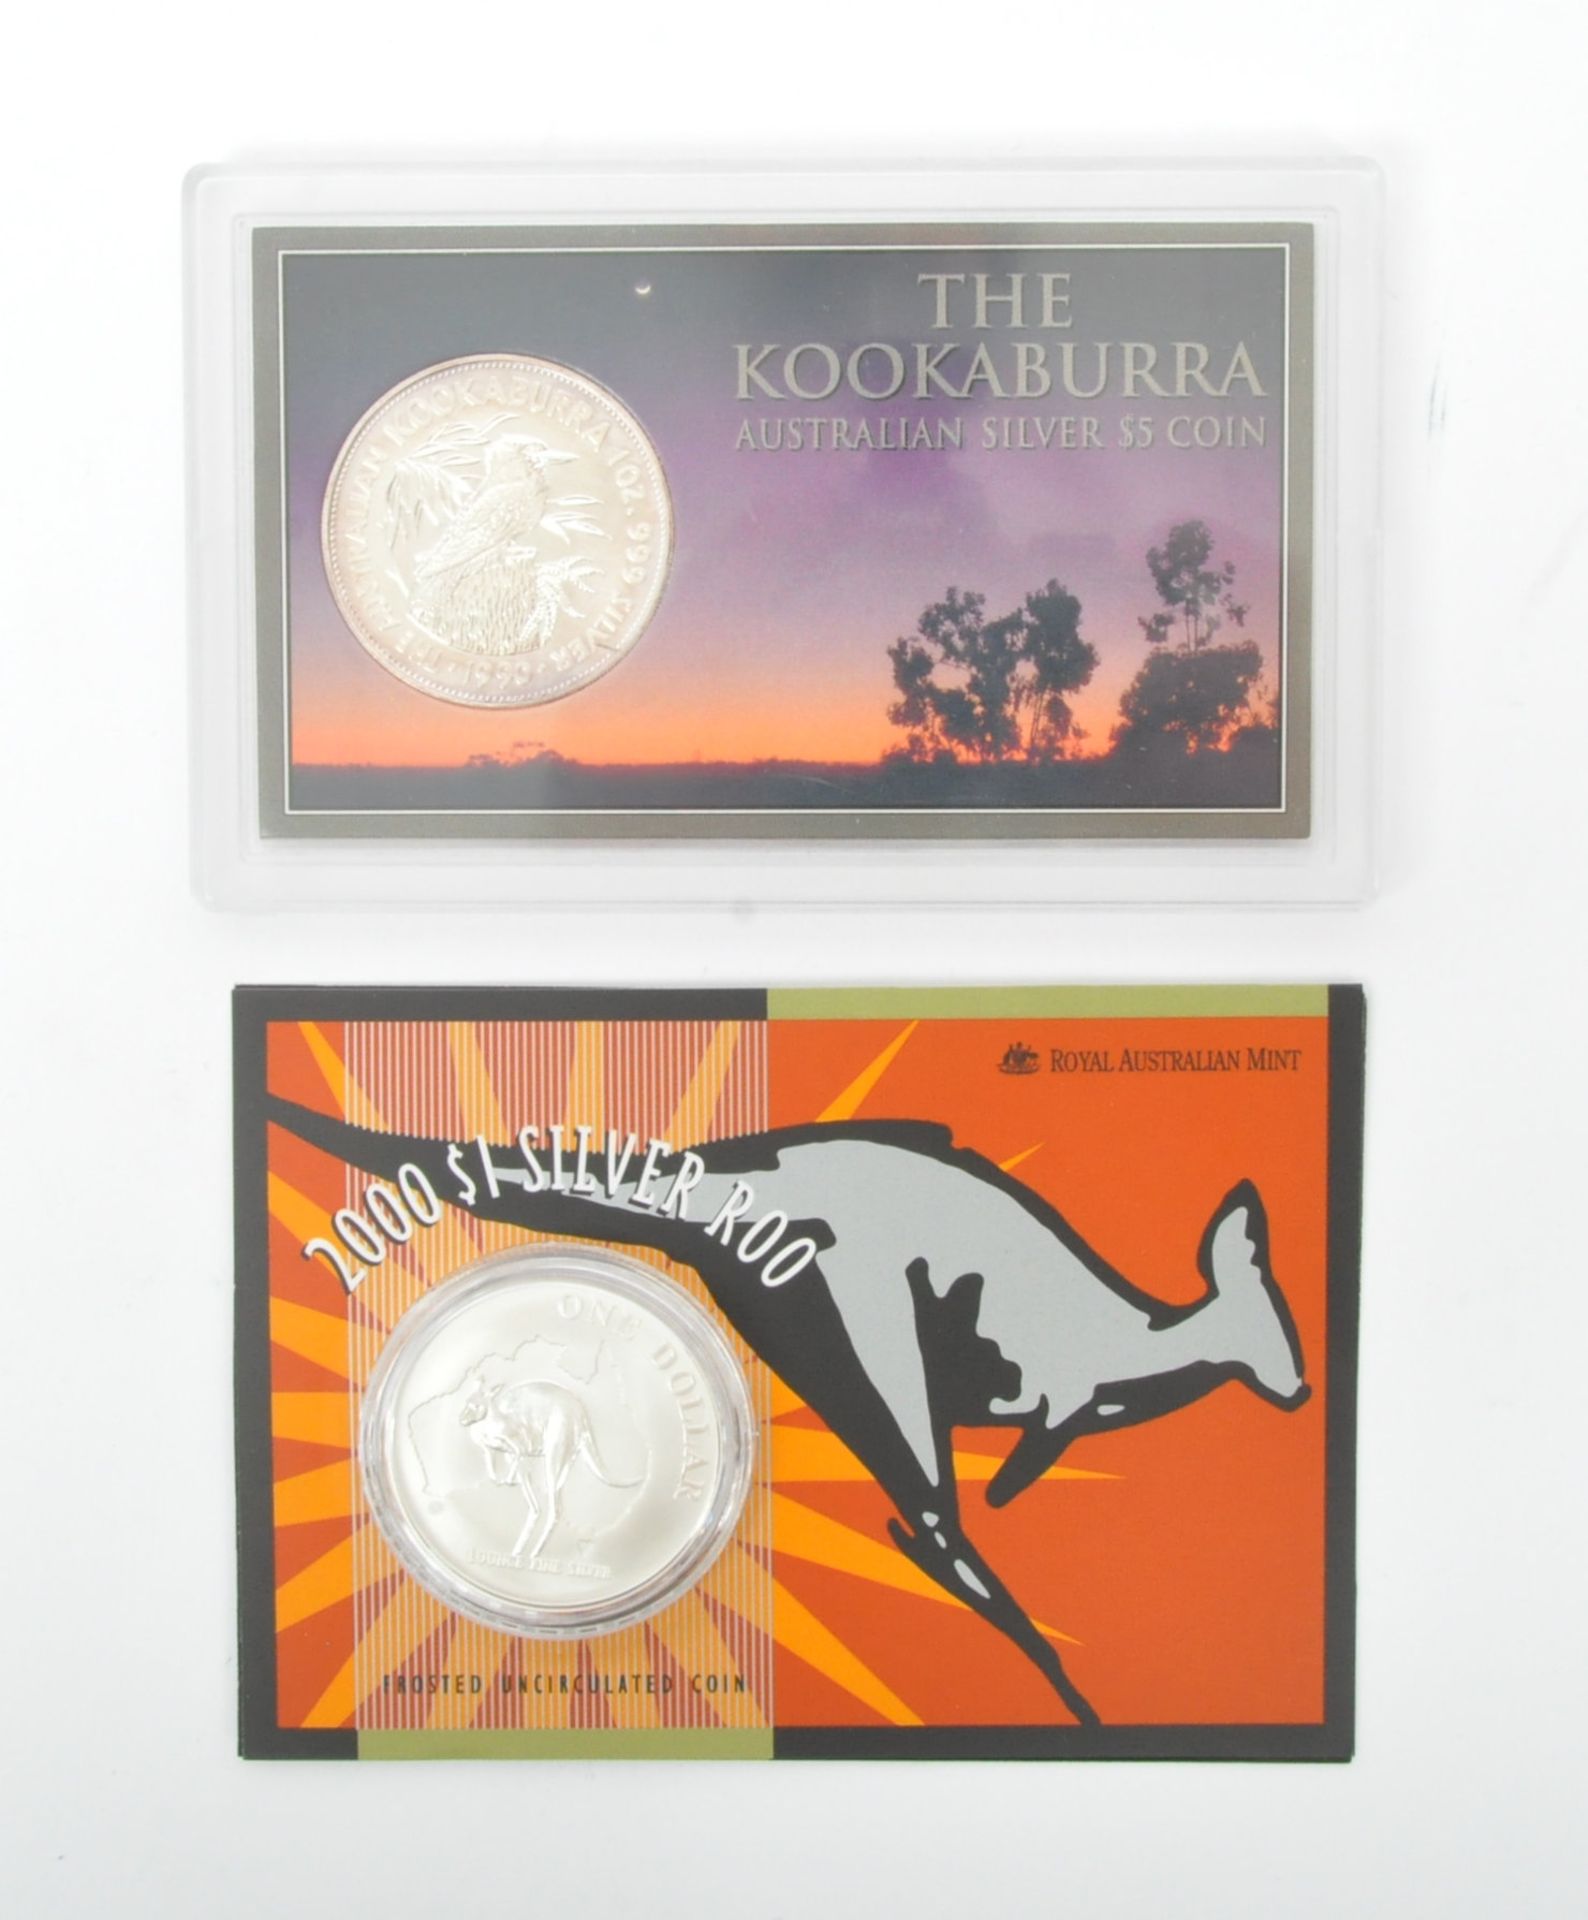 TWO SOLID SILVER AUSTRALIAN PROOF COINS - ONE DOLLAR & FIVE DOLLAR